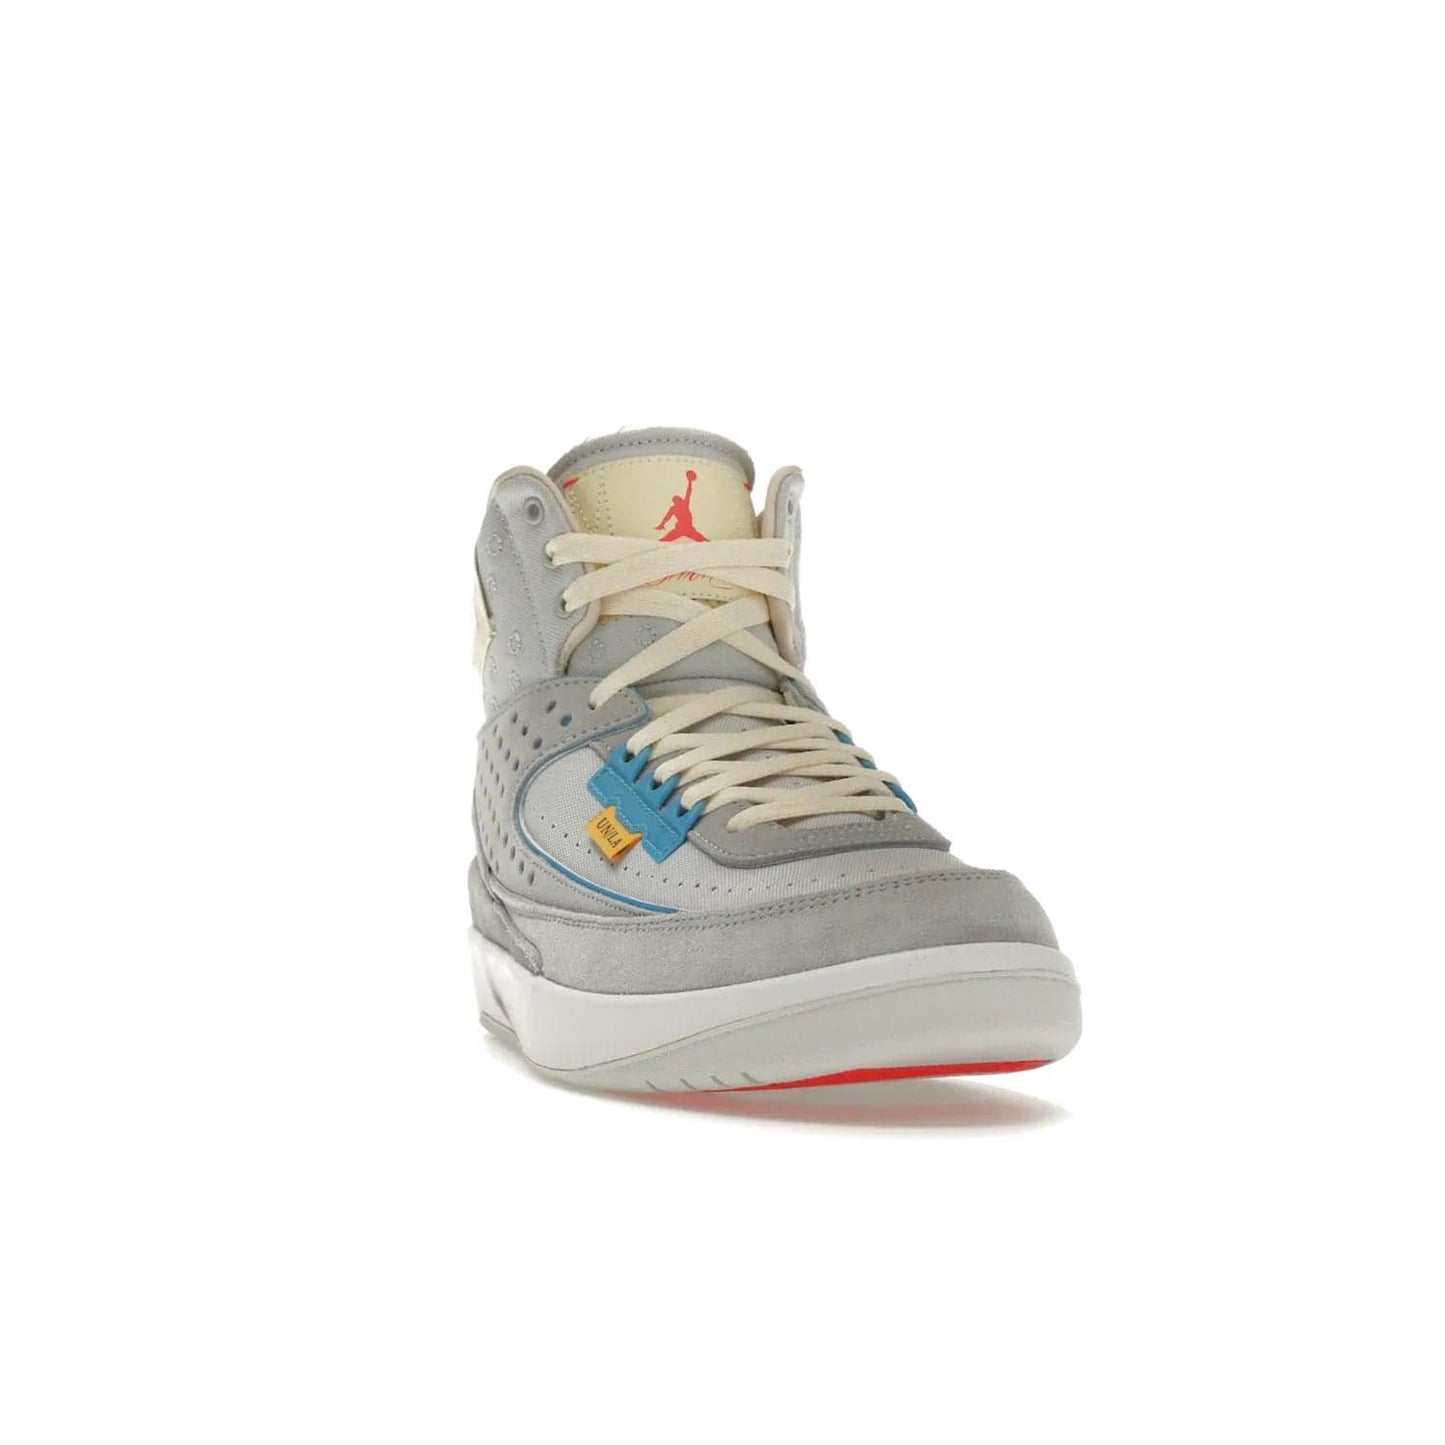 Jordan 2 Retro SP Union Grey Fog - Image 8 - Only at www.BallersClubKickz.com - Introducing the Air Jordan 2 Retro SP Union Grey Fog. This intricate sneaker design features a grey canvas upper with light blue eyelets, eyestay patches, and piping, plus custom external tags. Dropping in April 2022, this exclusive release offers a worn-in look and feel.